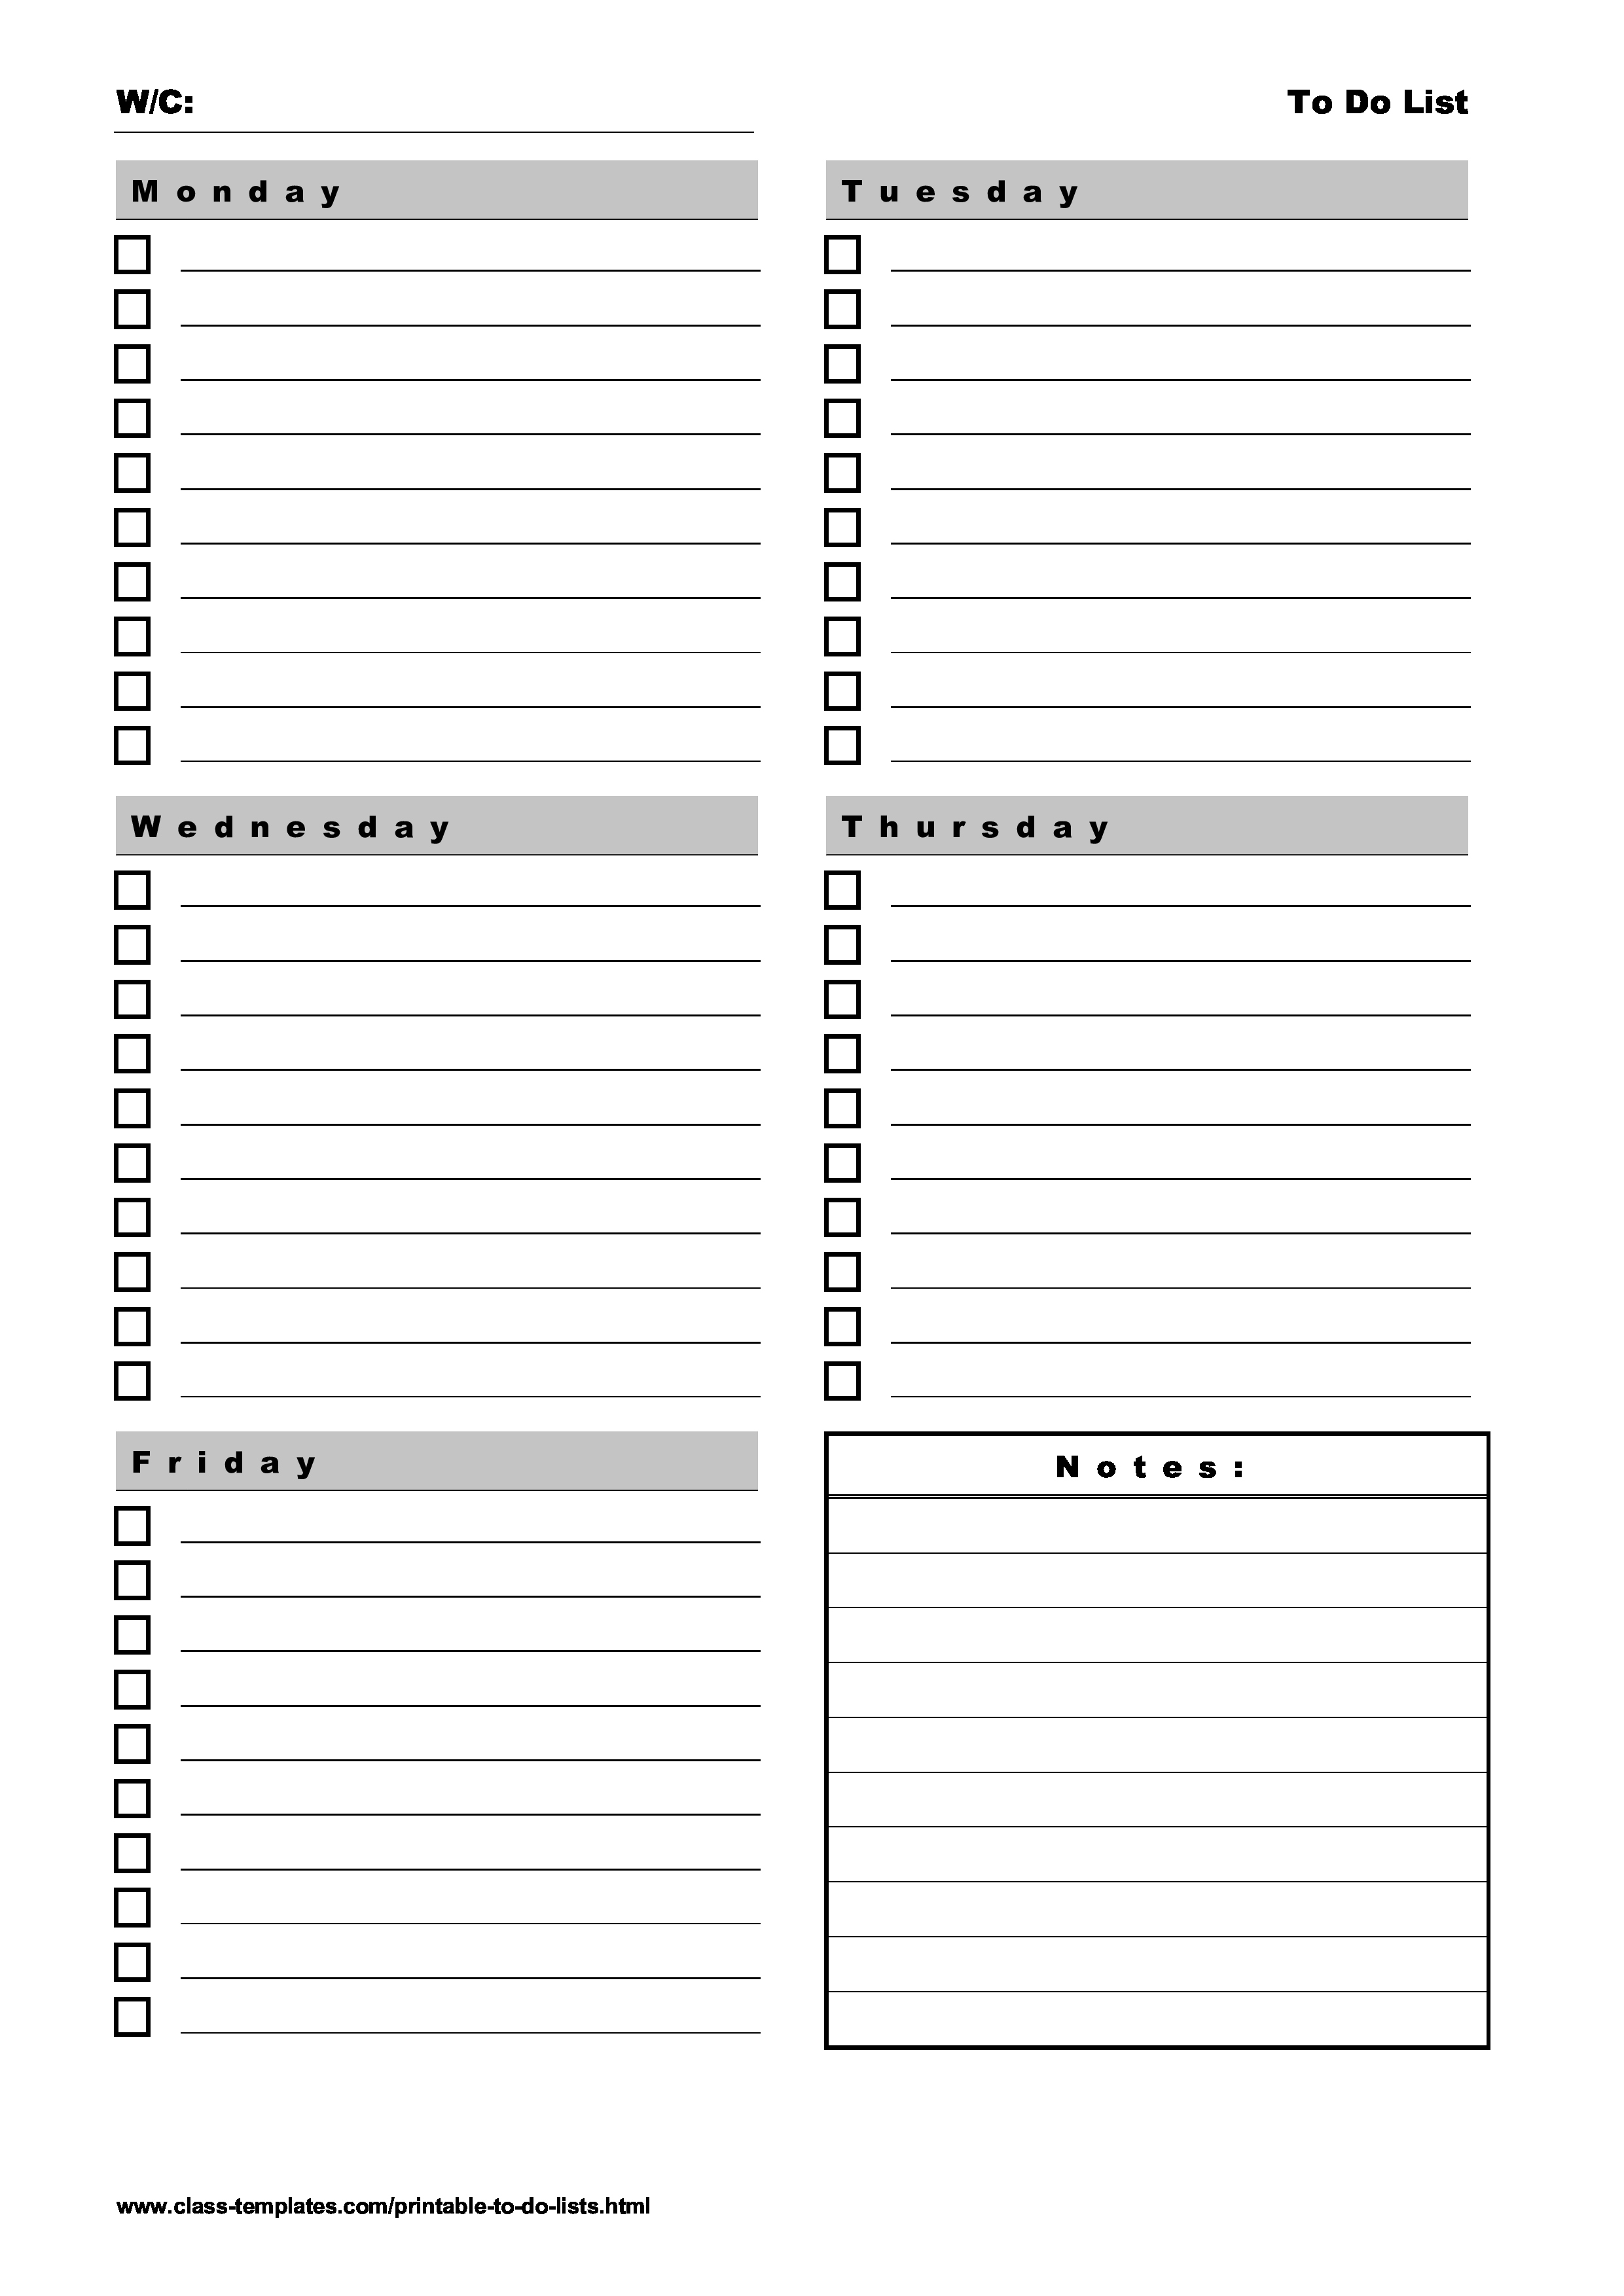 Weekly Things to Do List Beautiful Free Printable to Do List 5 Days Weekly Plan